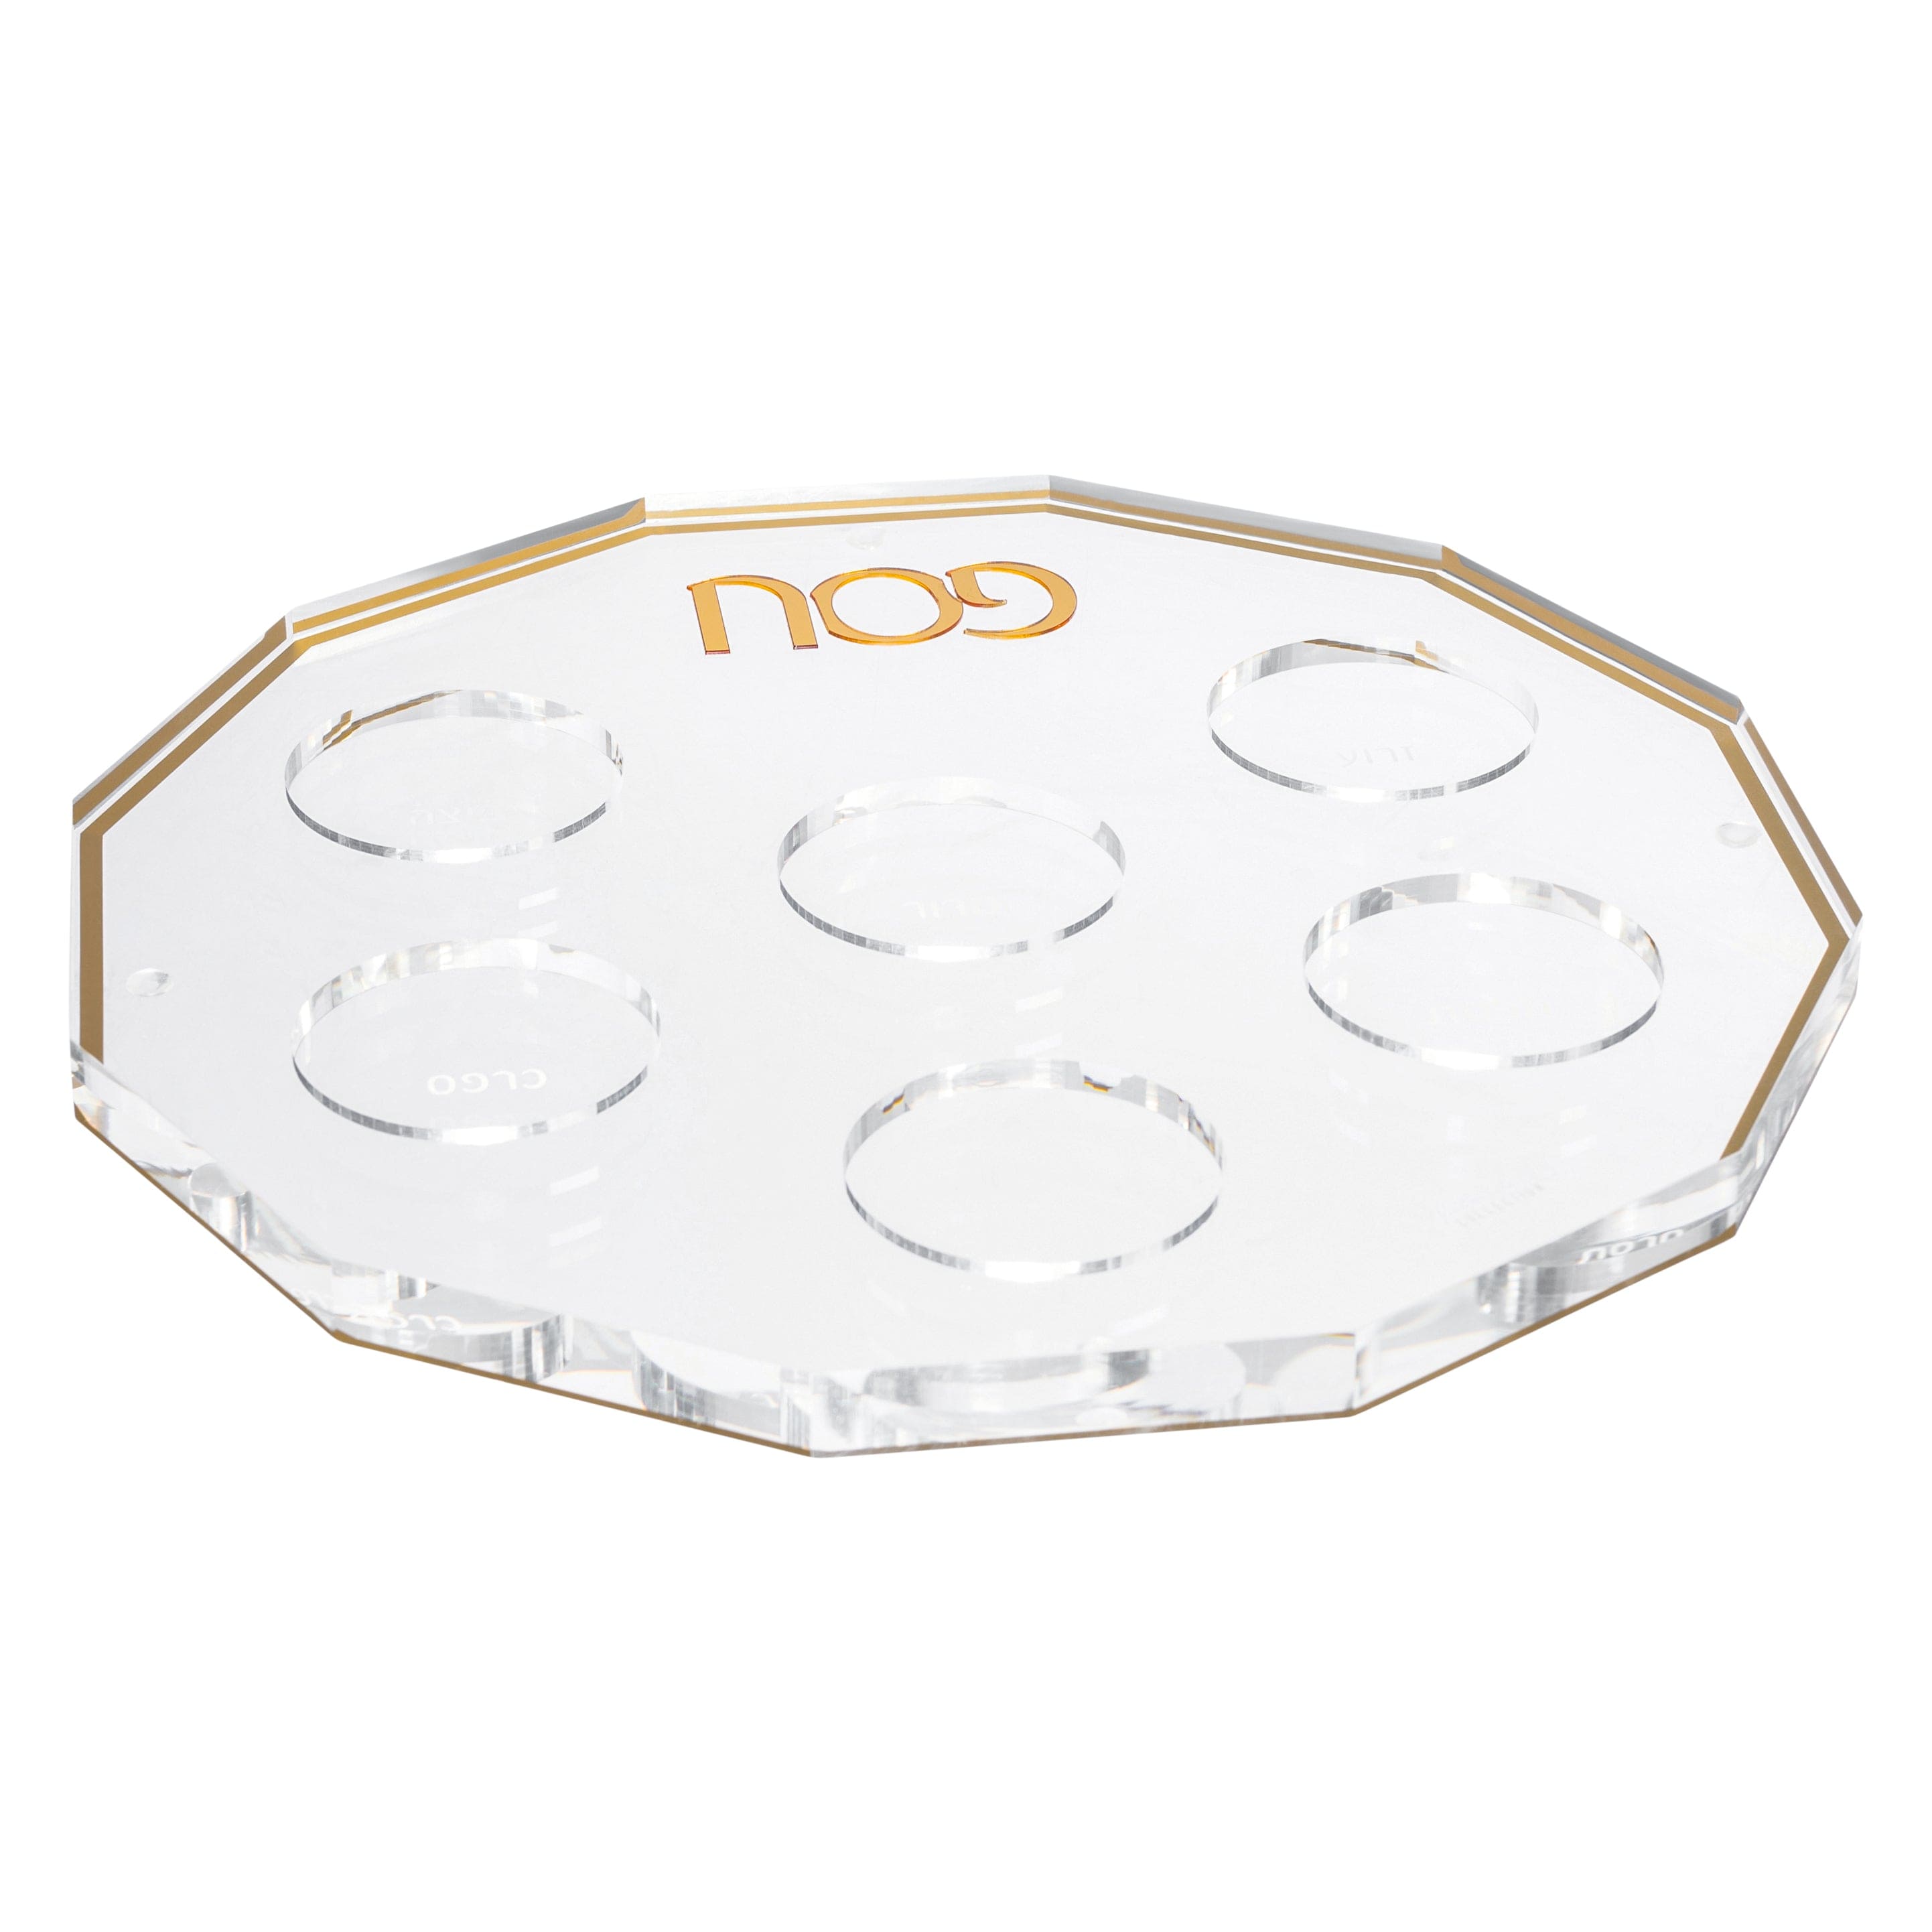 Hexagon Outline Seder Plate - Waterdale Collection